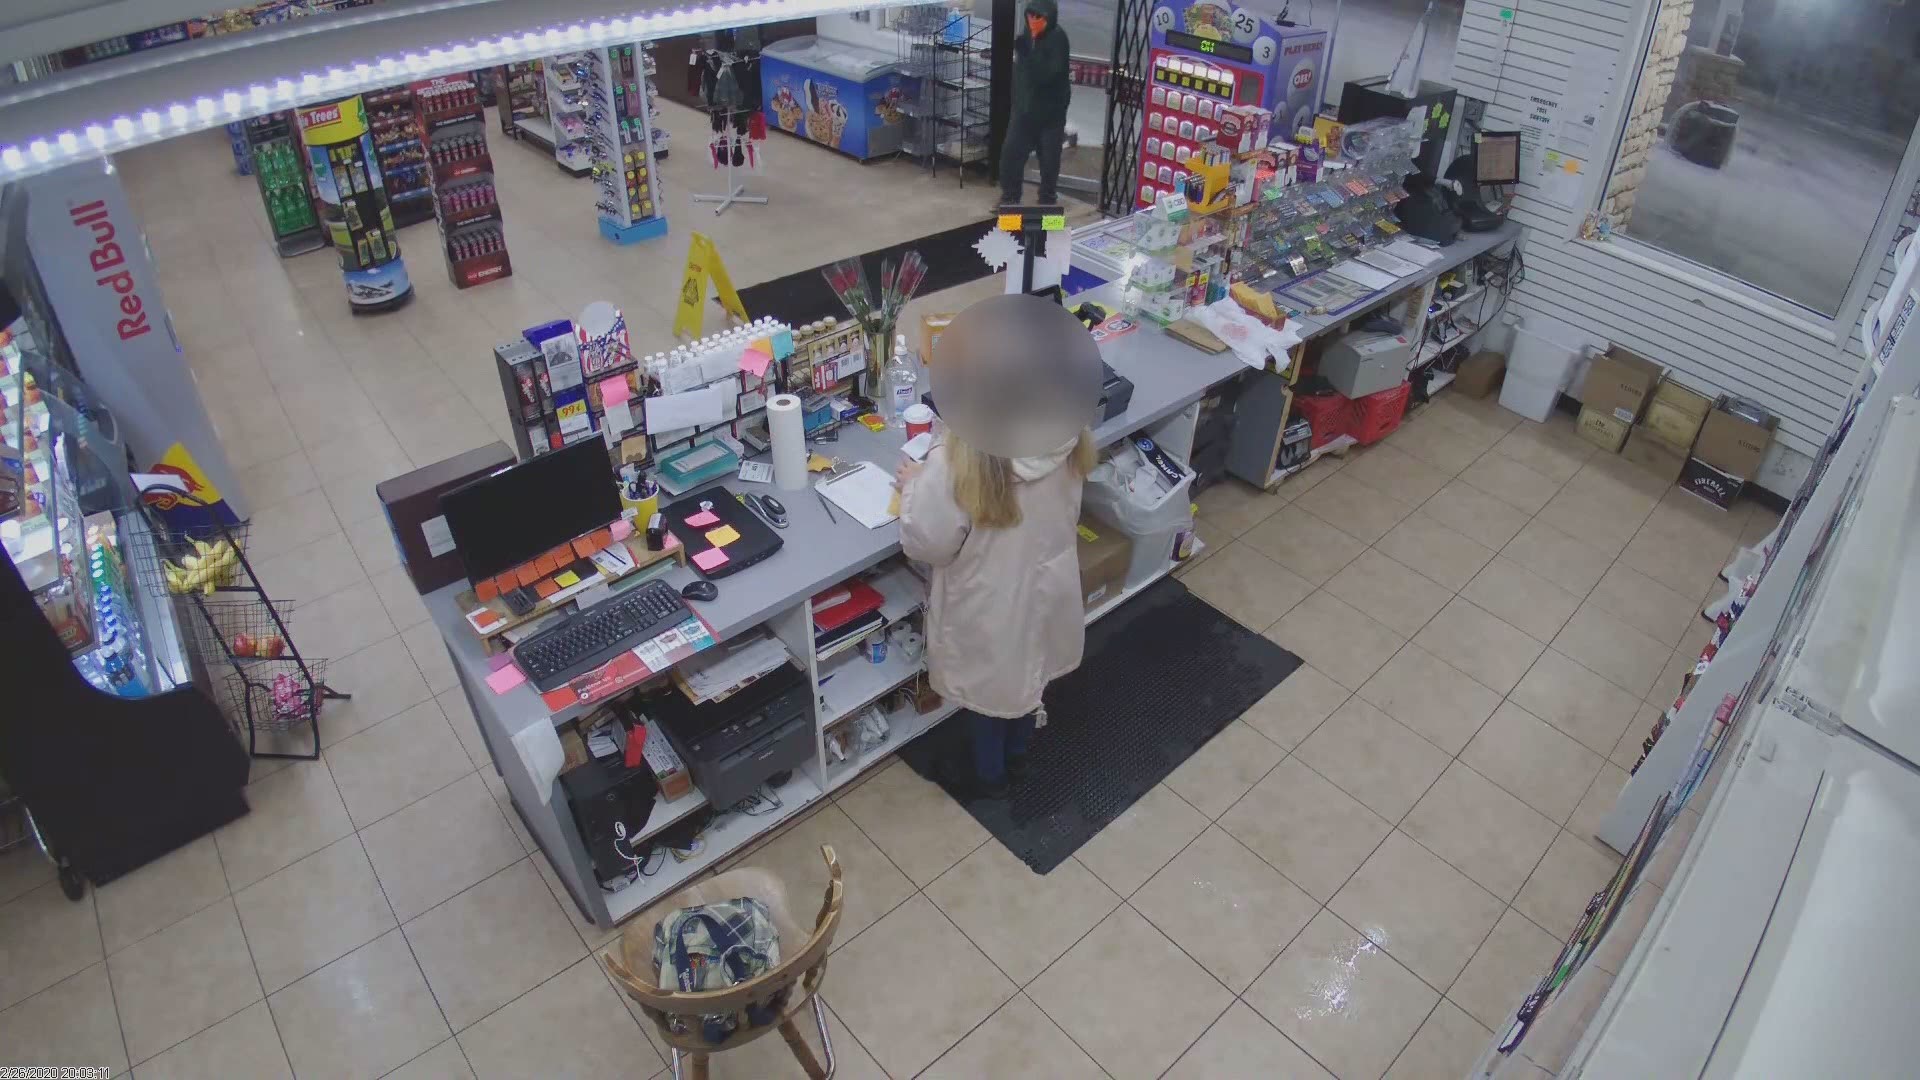 A clerk at the Stop & Go in Sylvania Township called 911 to report a car running outside for nearly an hour. Video shows the robber with a large knife.